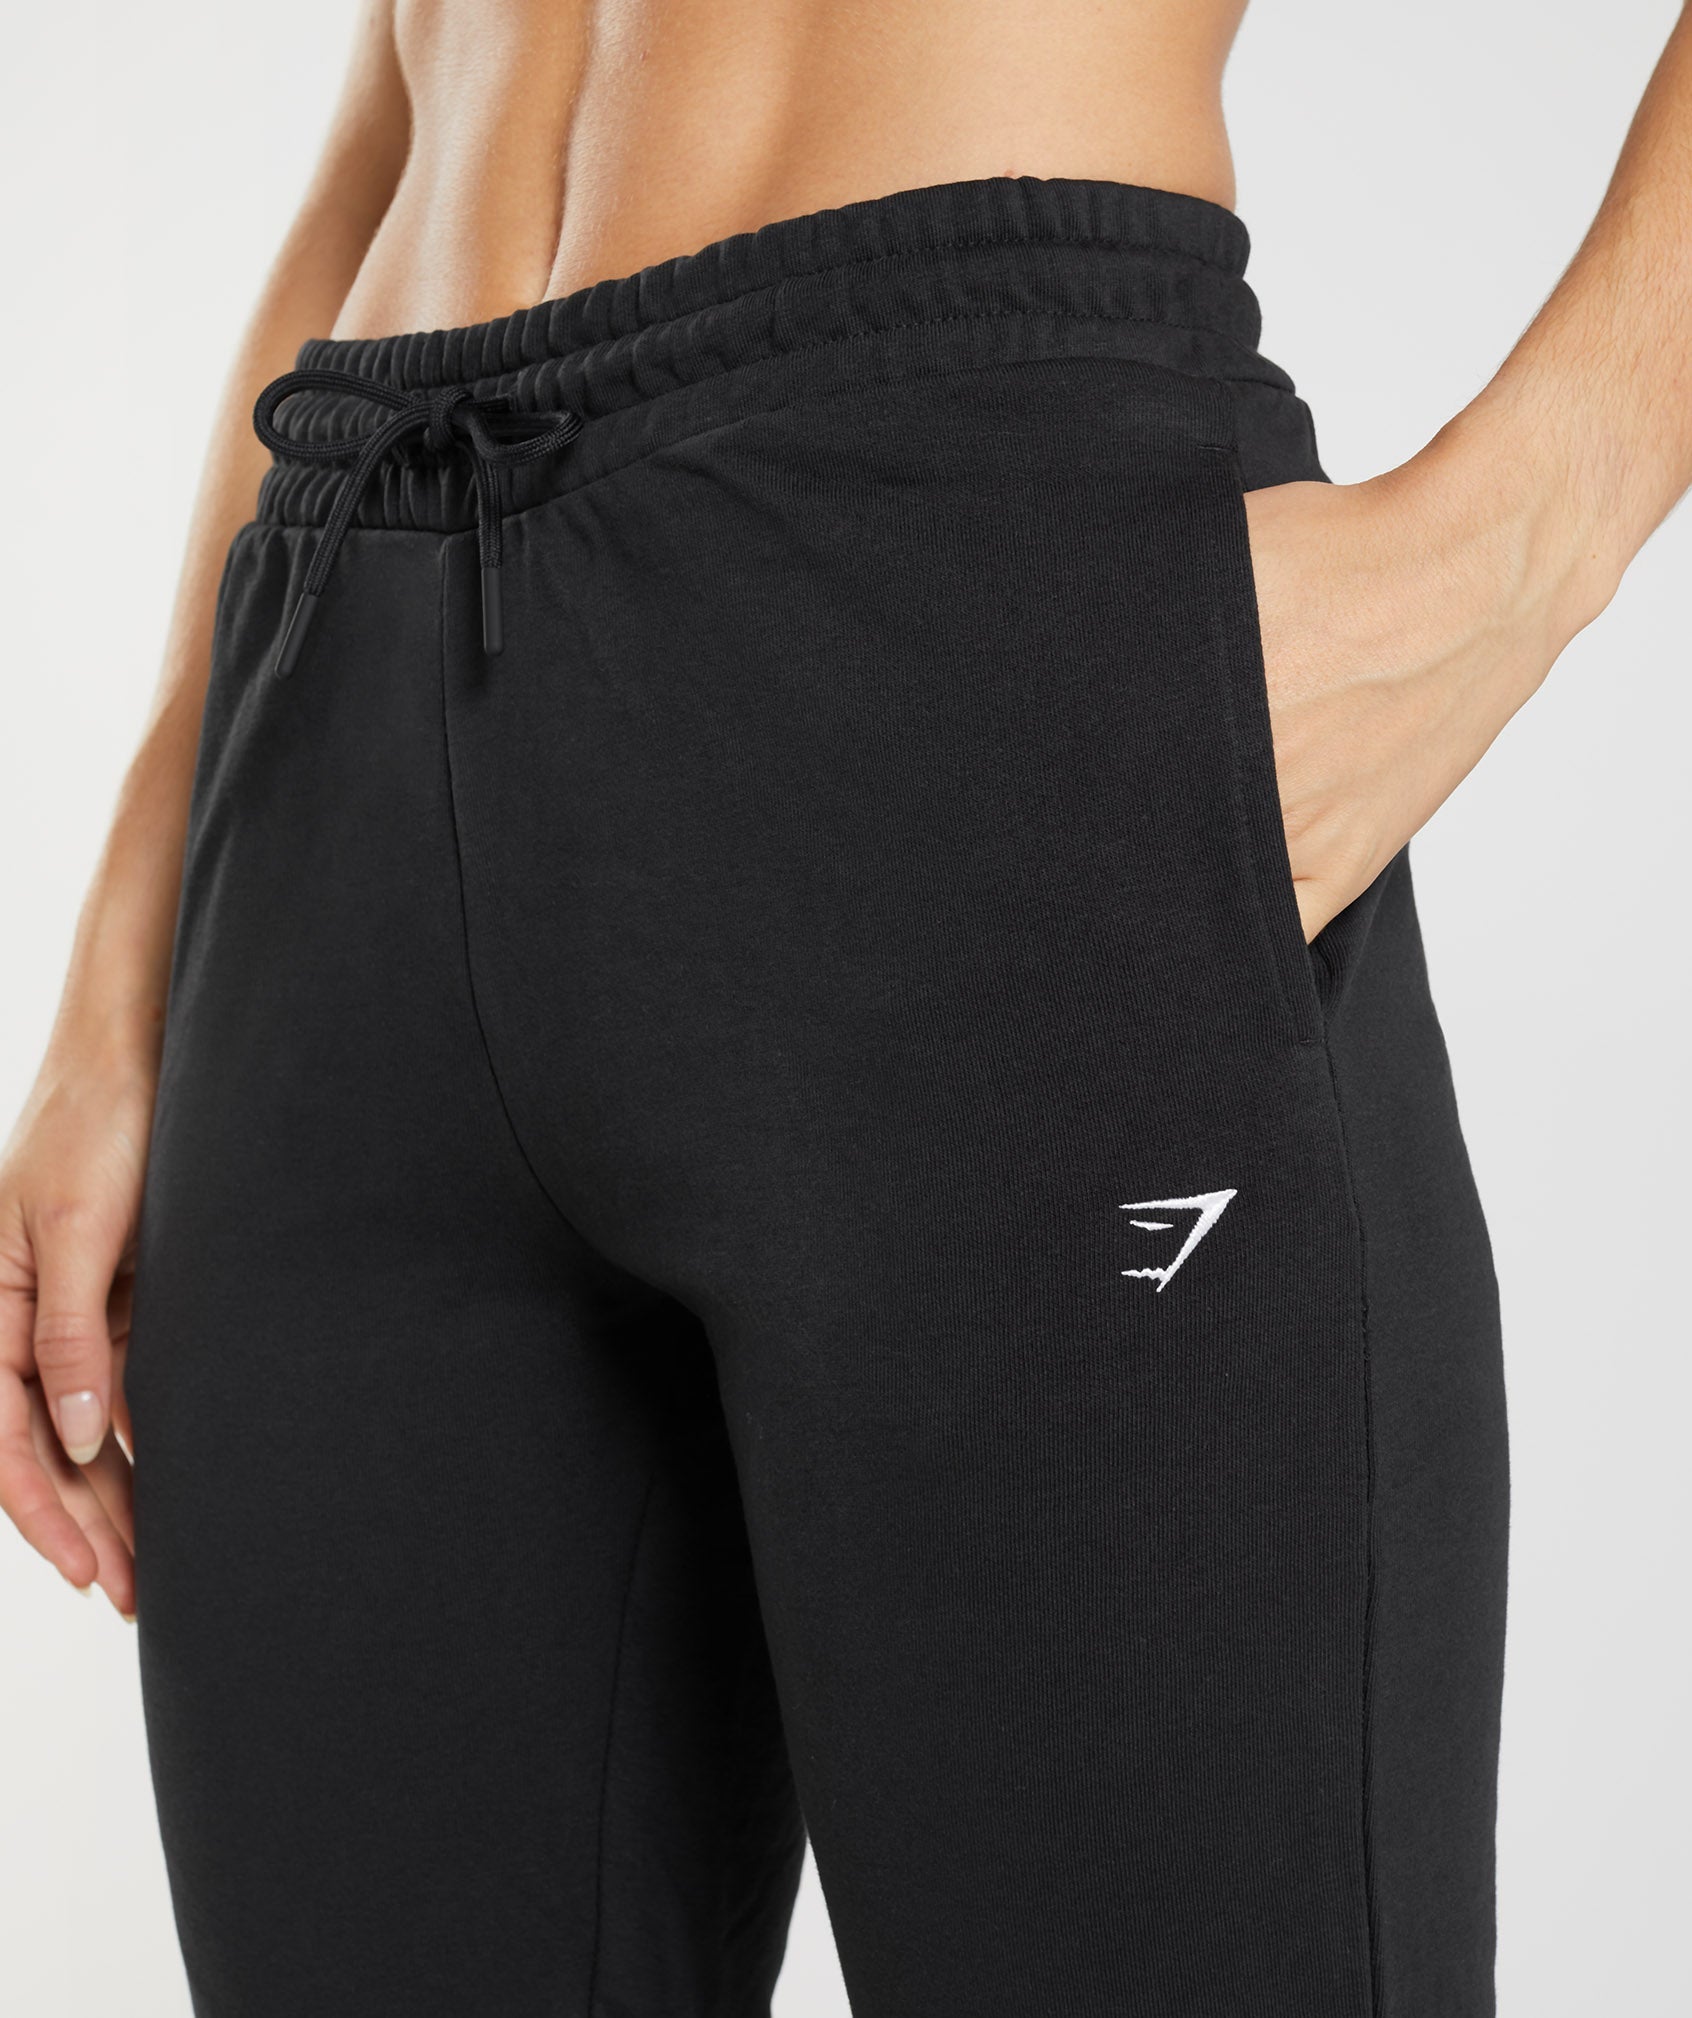 Gymshark Winter Tracksuit Bottoms (Joggers) - Black / Small